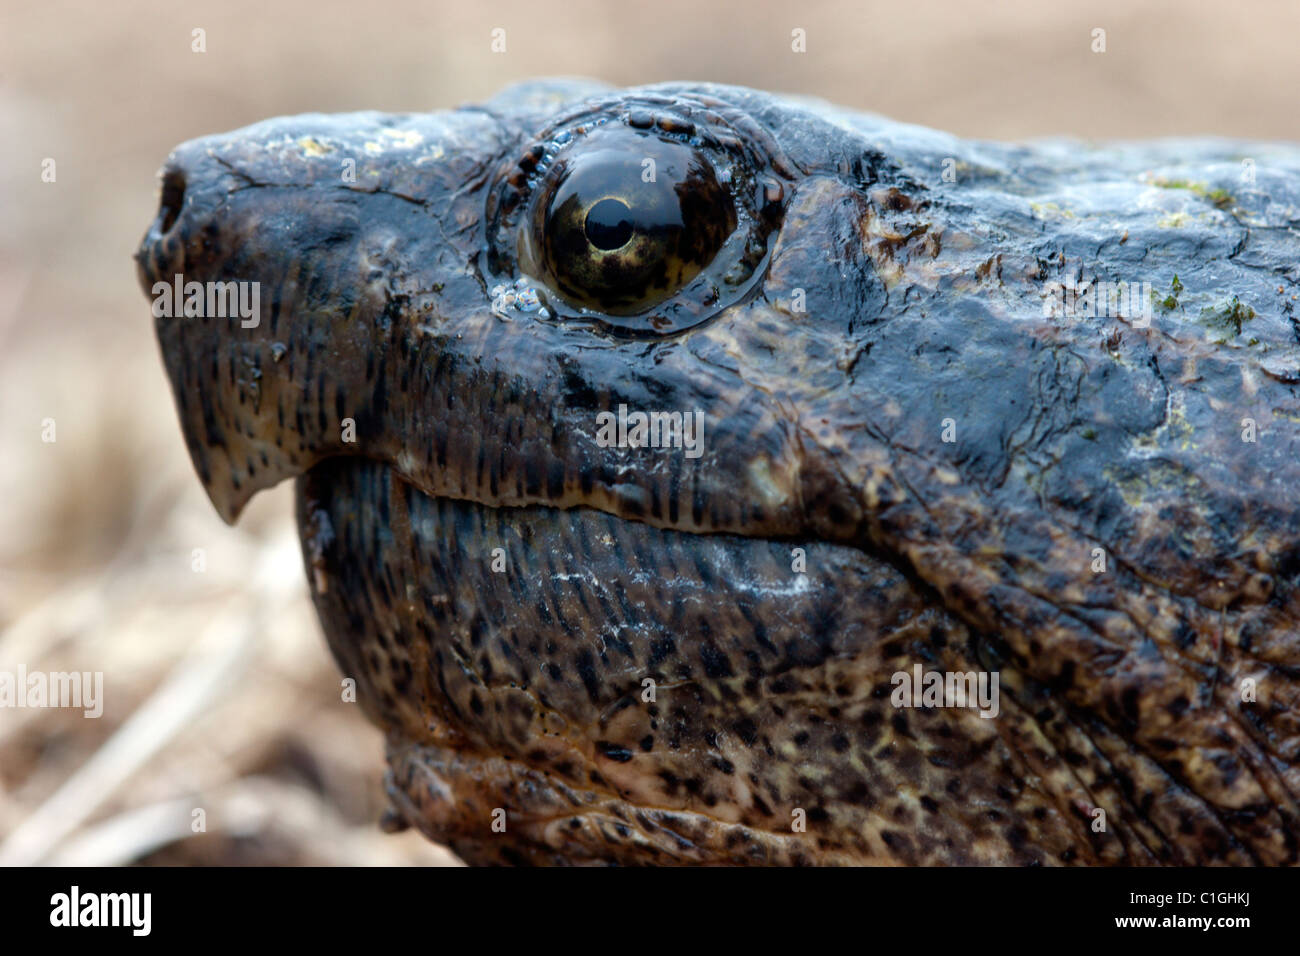 large snapping turtle reptile cold blooded close up macro portrait Stock Photo